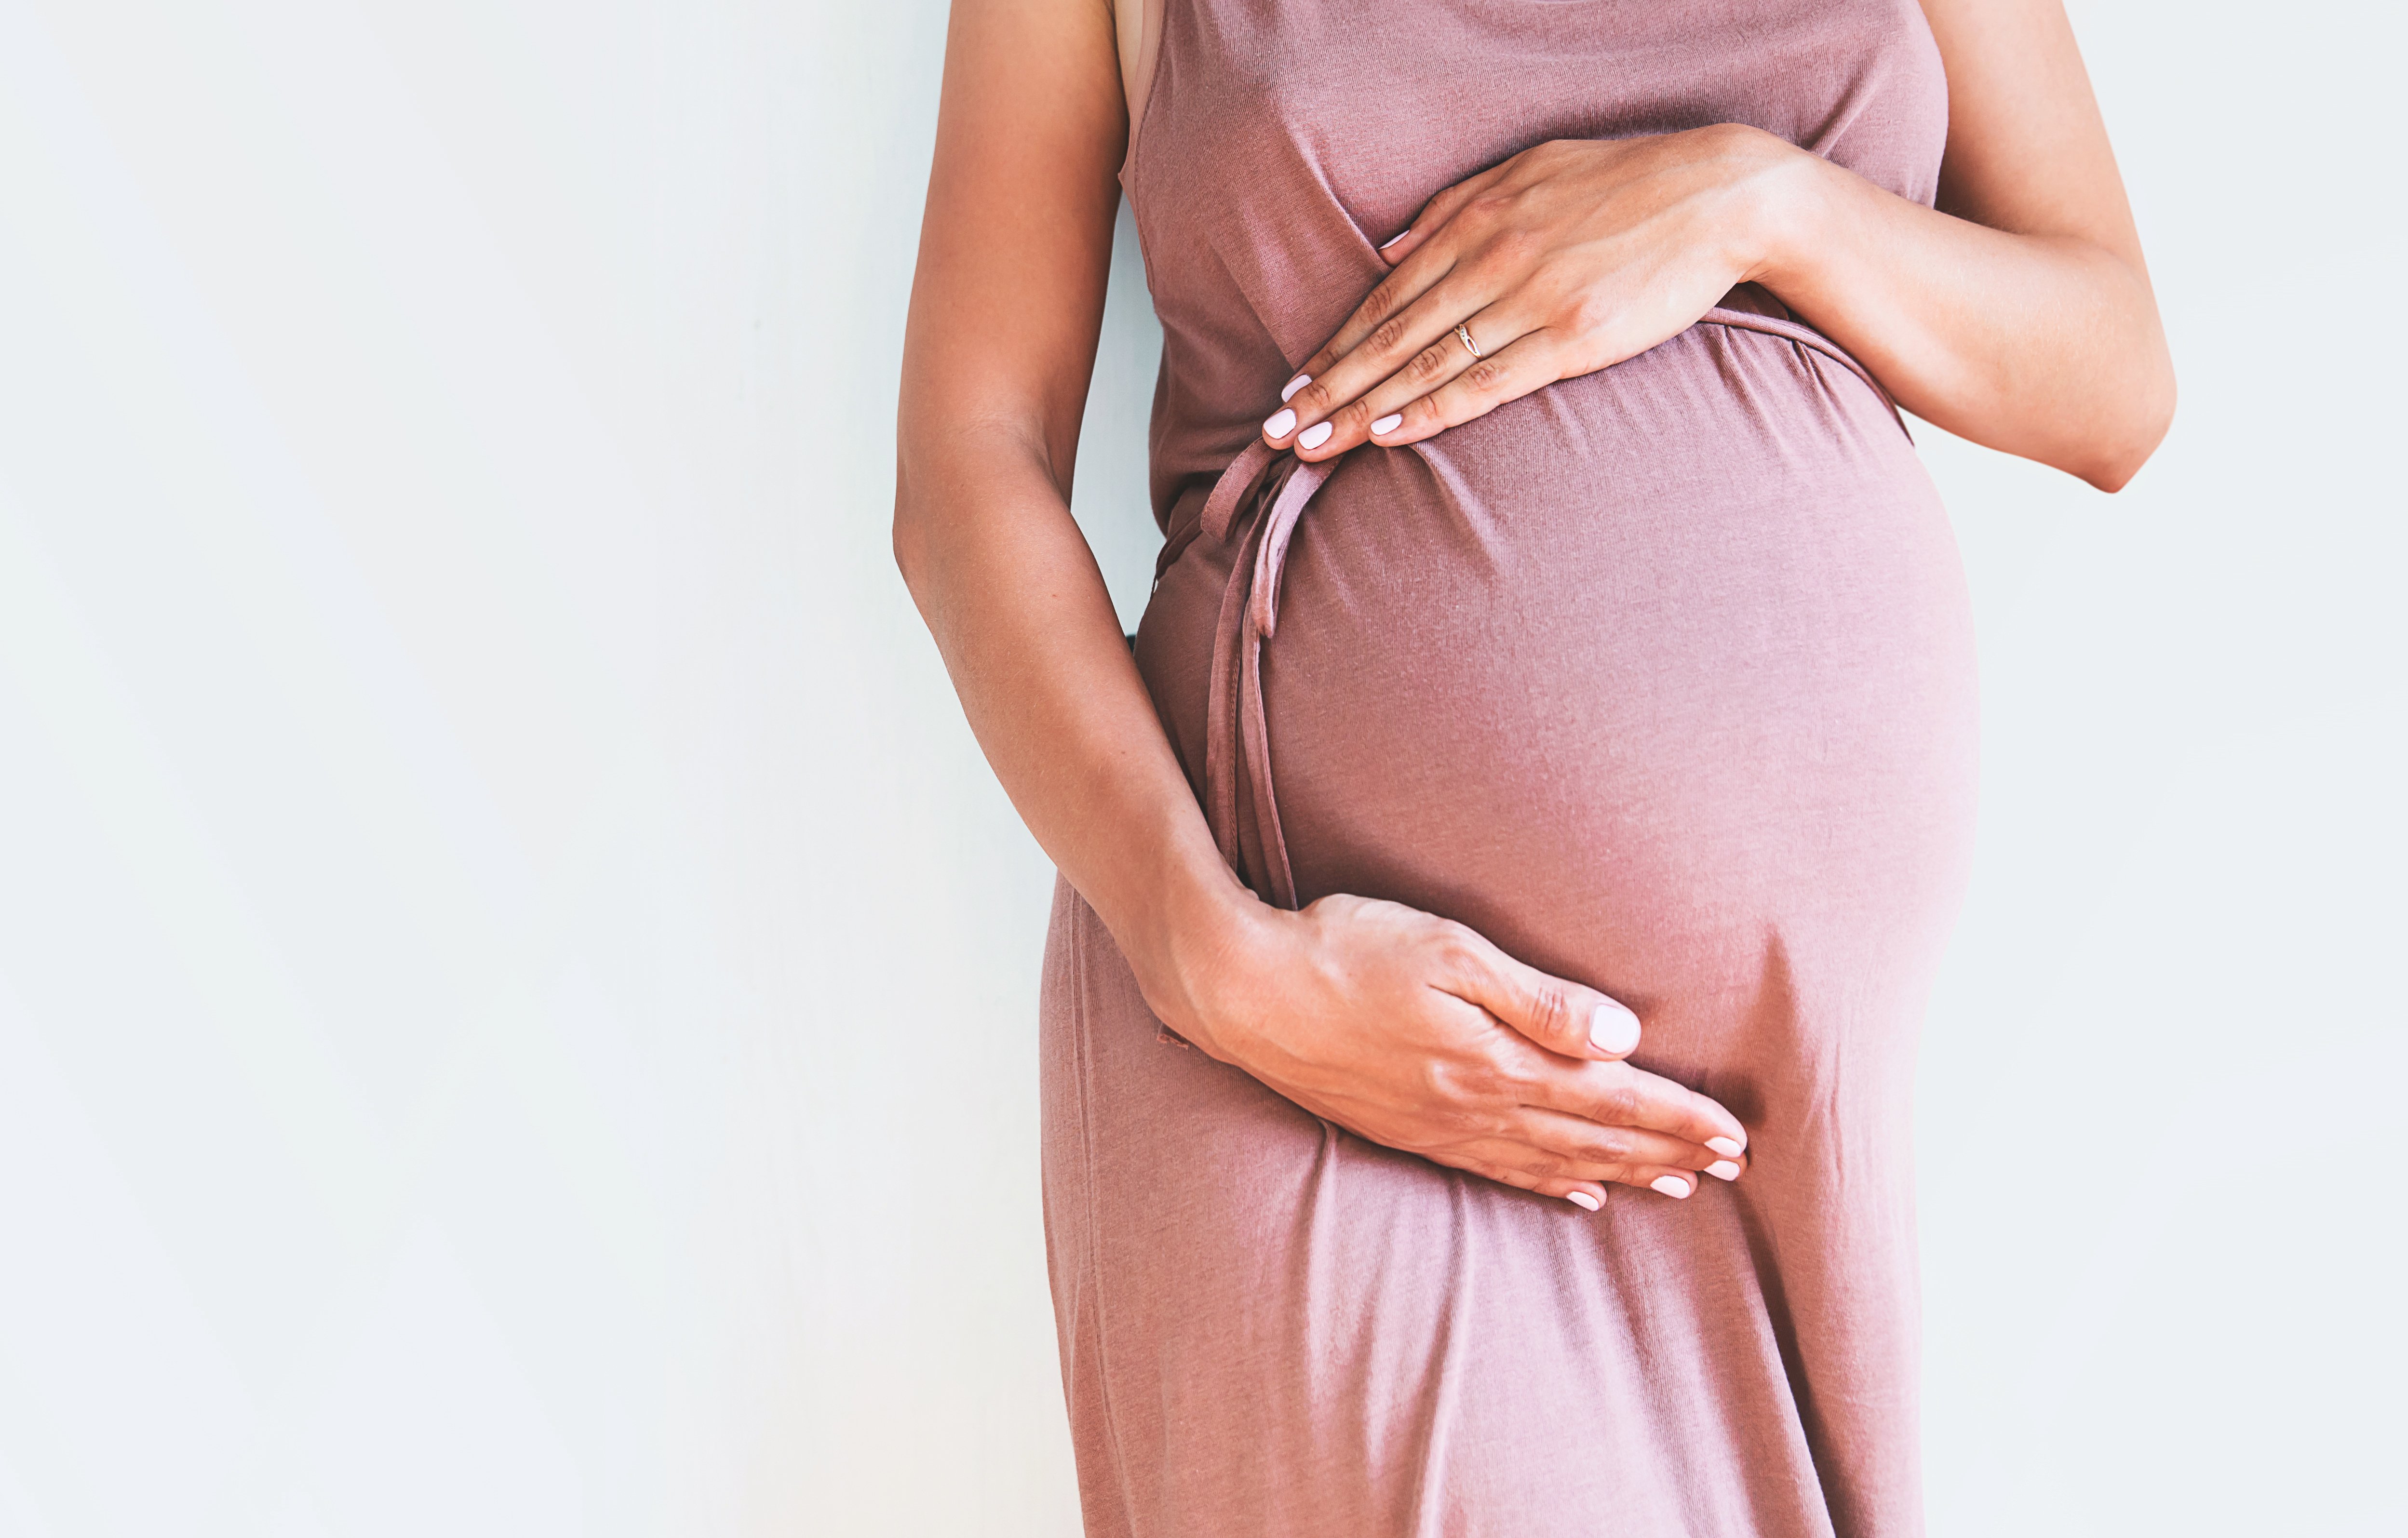 The doctor confirmed she was pregnant. | Photo: Shutterstock